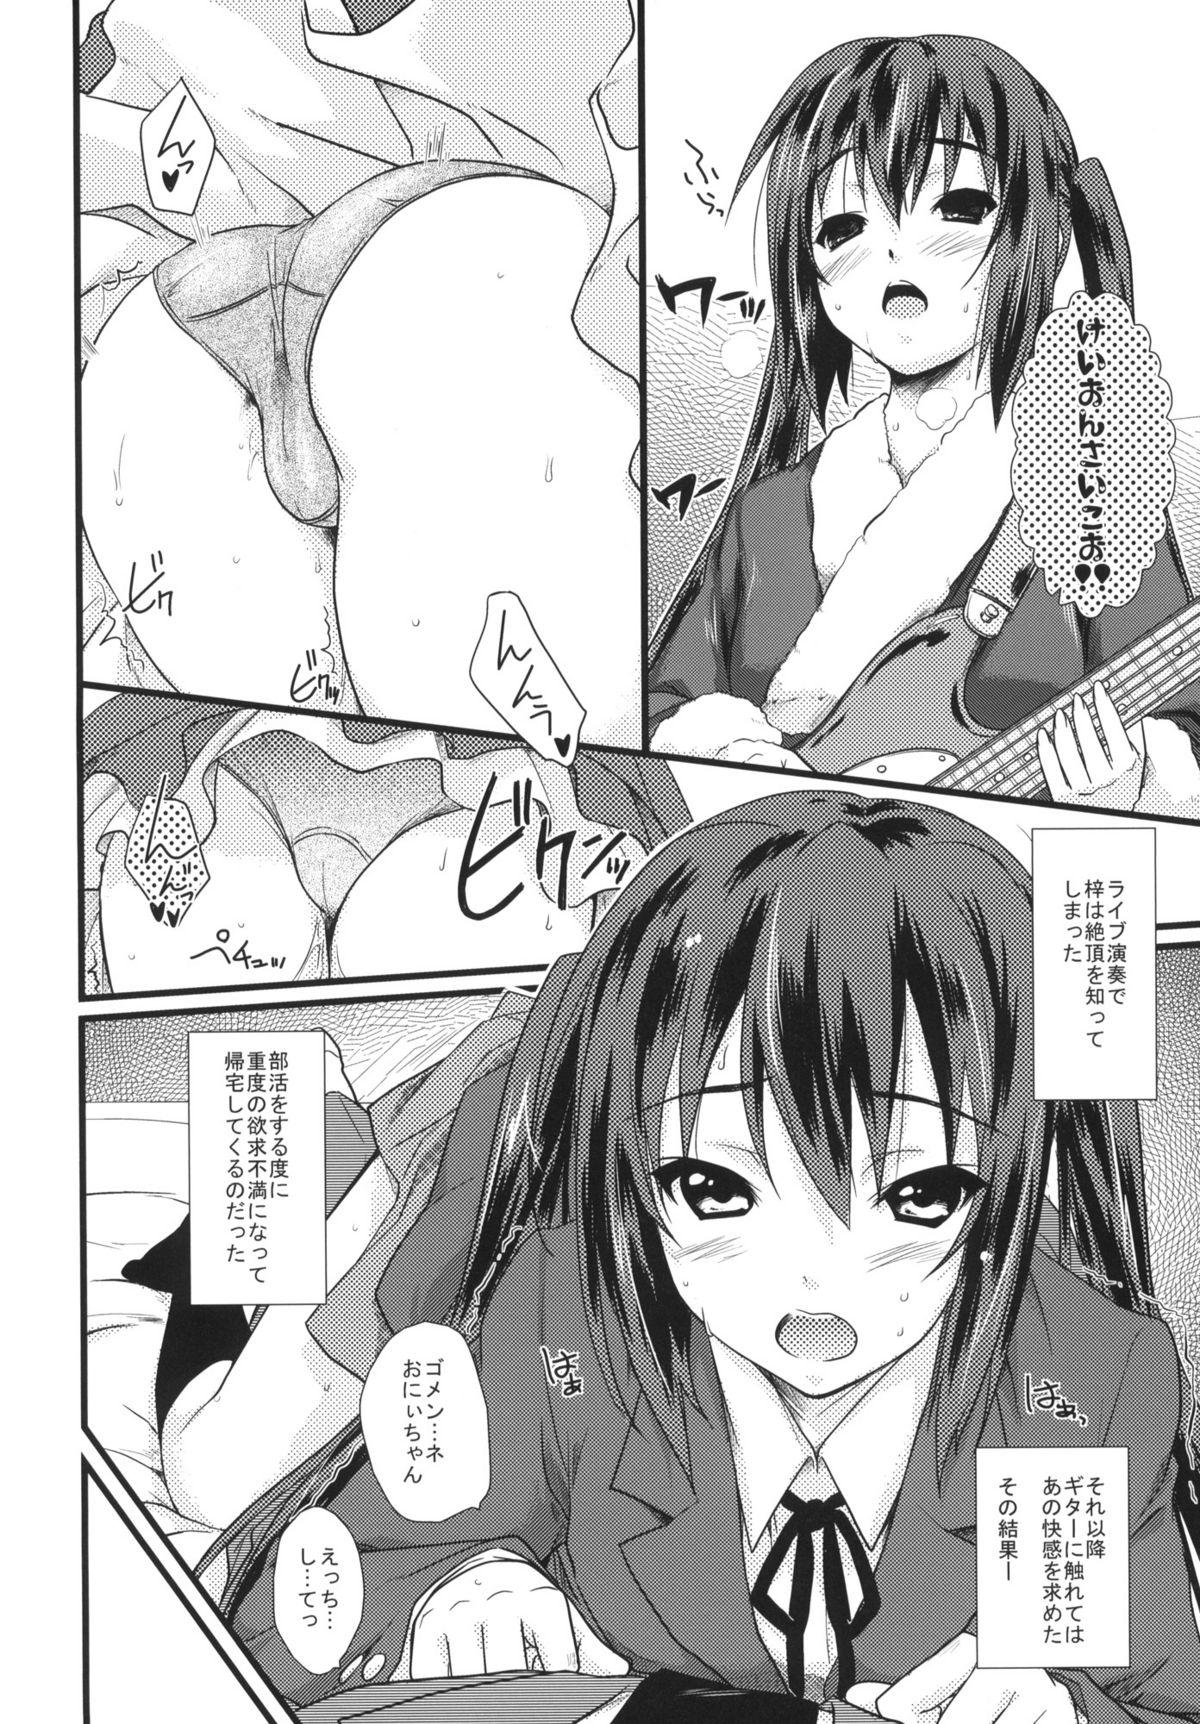 18 Year Old Present - K-on Bed - Page 3